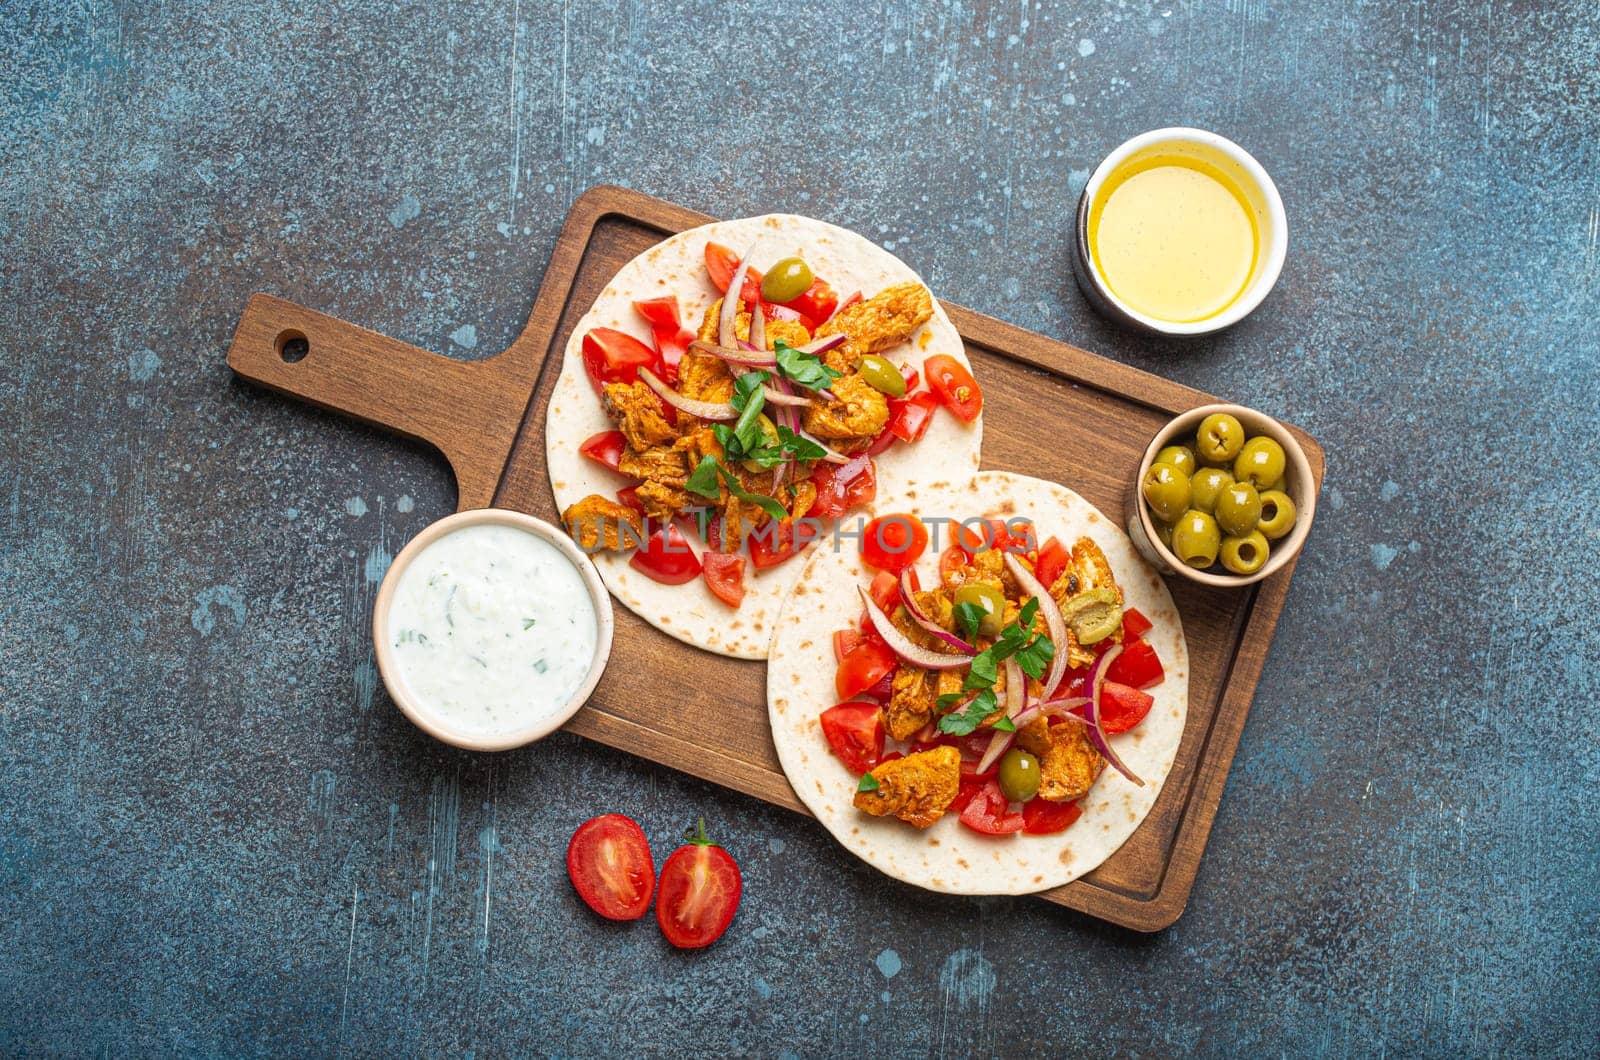 Cooking Traditional Greek Dish Gyros: Pita bread with vegetables, meat, herbs, olives on rustic wooden cutting board with Tzatziki sauce, olive oil top view on dark blue stone background.